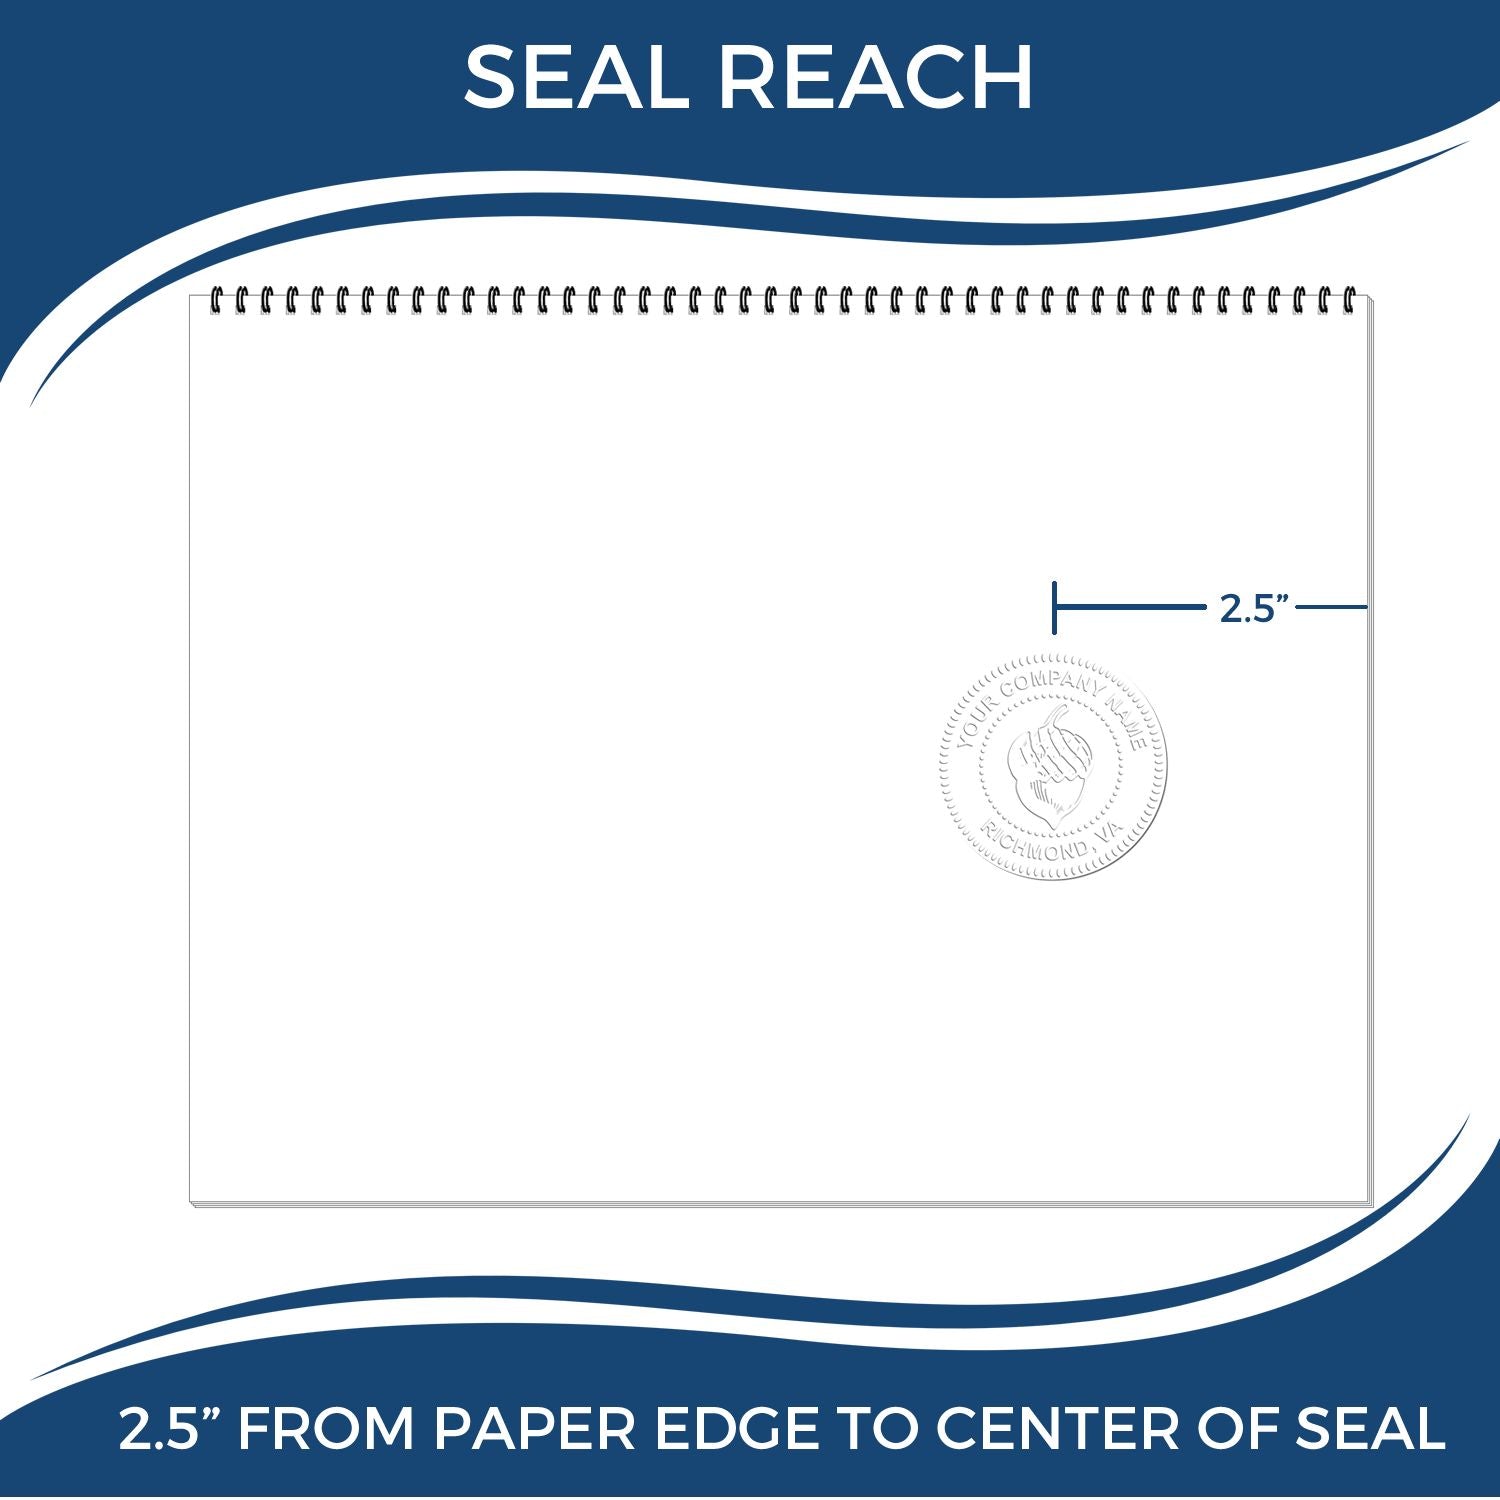 An infographic showing the seal reach which is represented by a ruler and a miniature seal image of the Heavy Duty Cast Iron Indiana Land Surveyor Seal Embosser